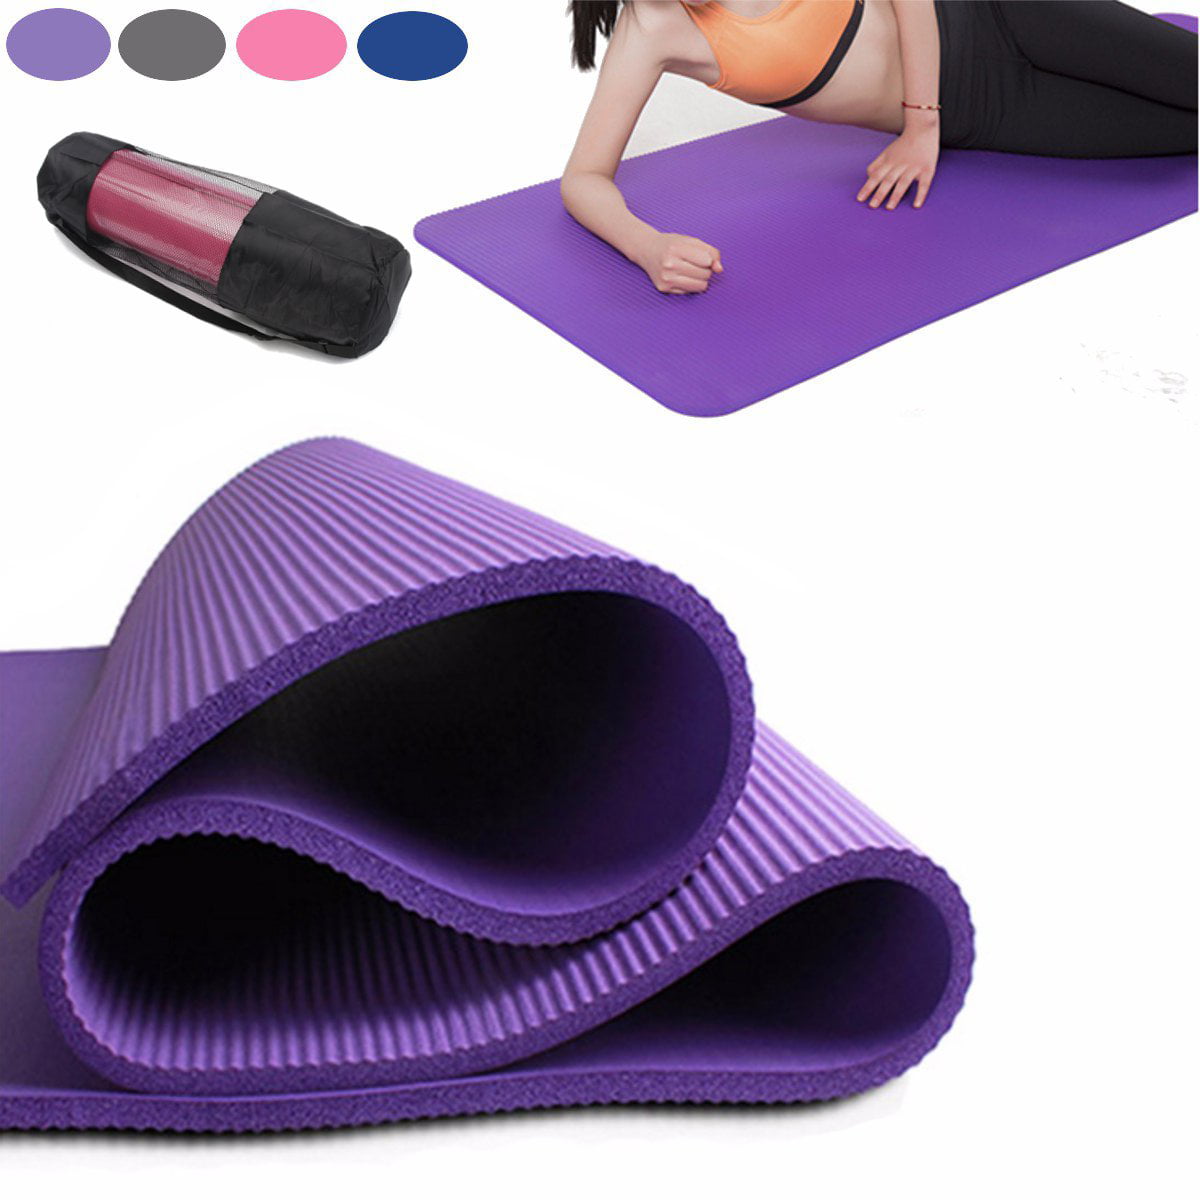 6-10mm Non-slip Yoga Mat Health Lose Weight Fitness Durable Thick Exercise Pad 